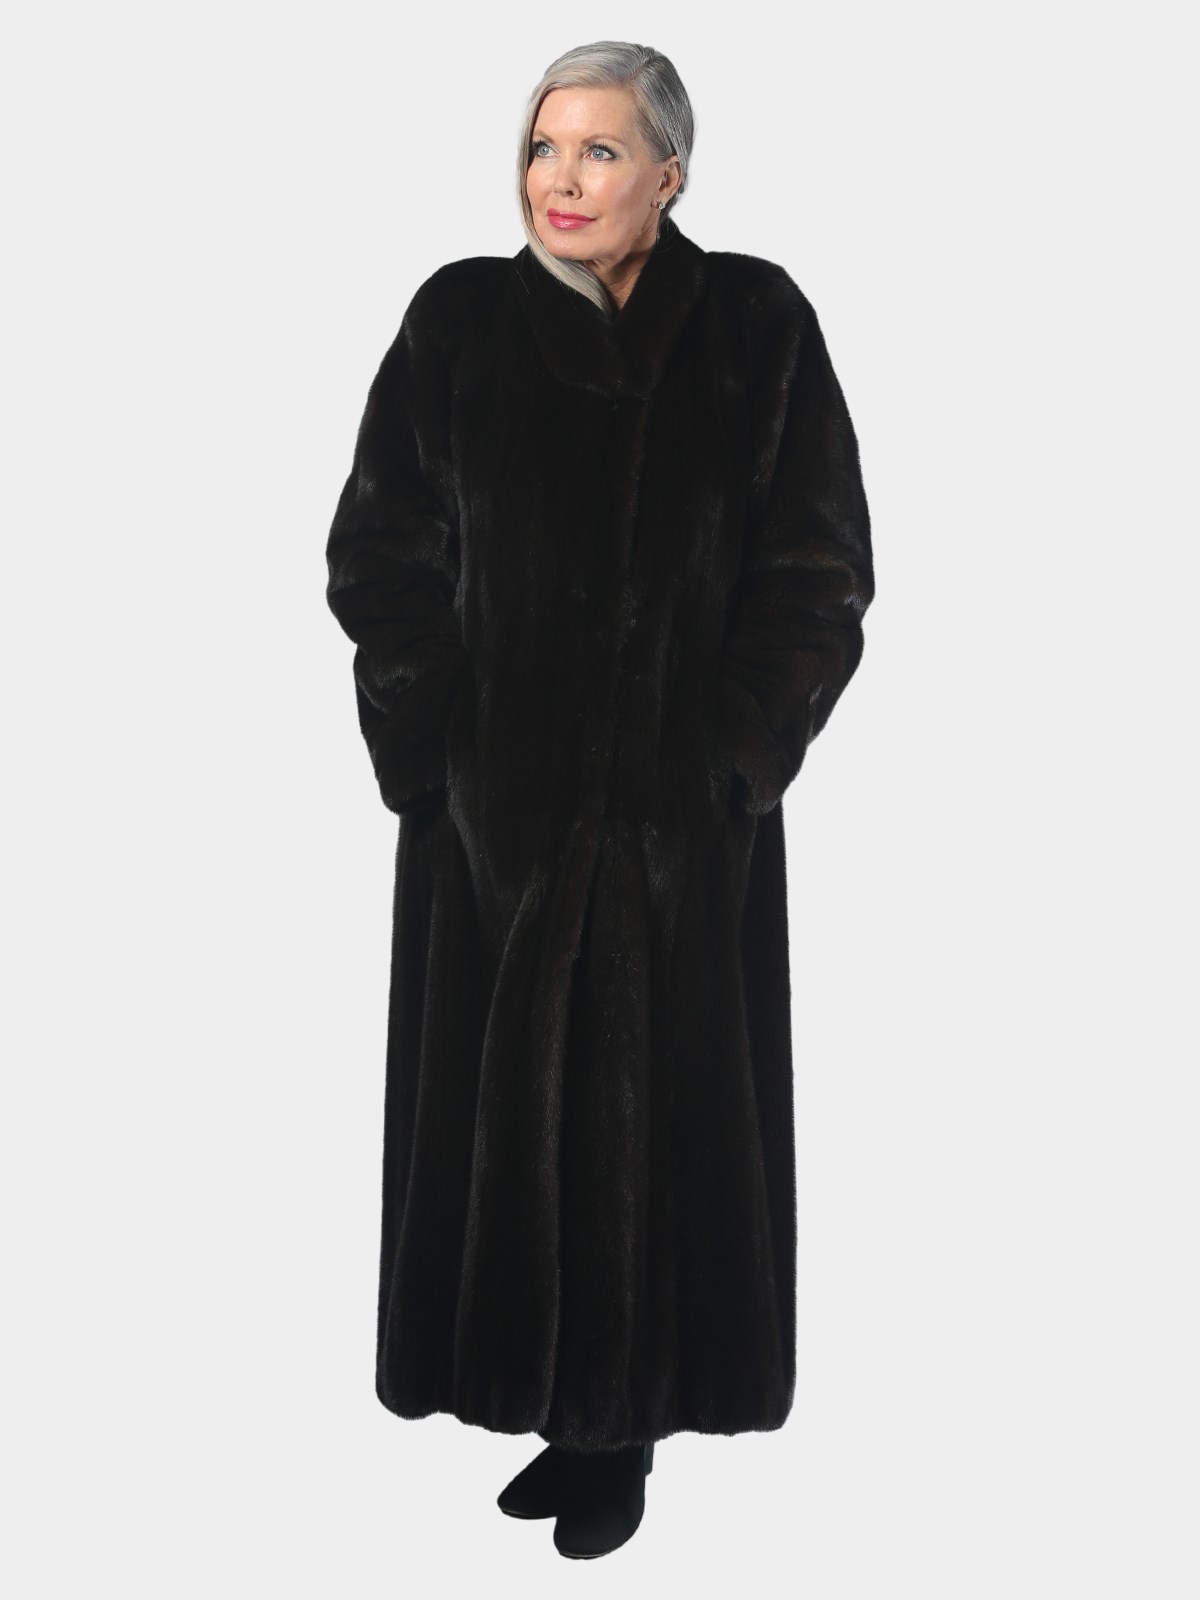 New Fur Coats, Fur Jackets and Outerwear | Estate Furs